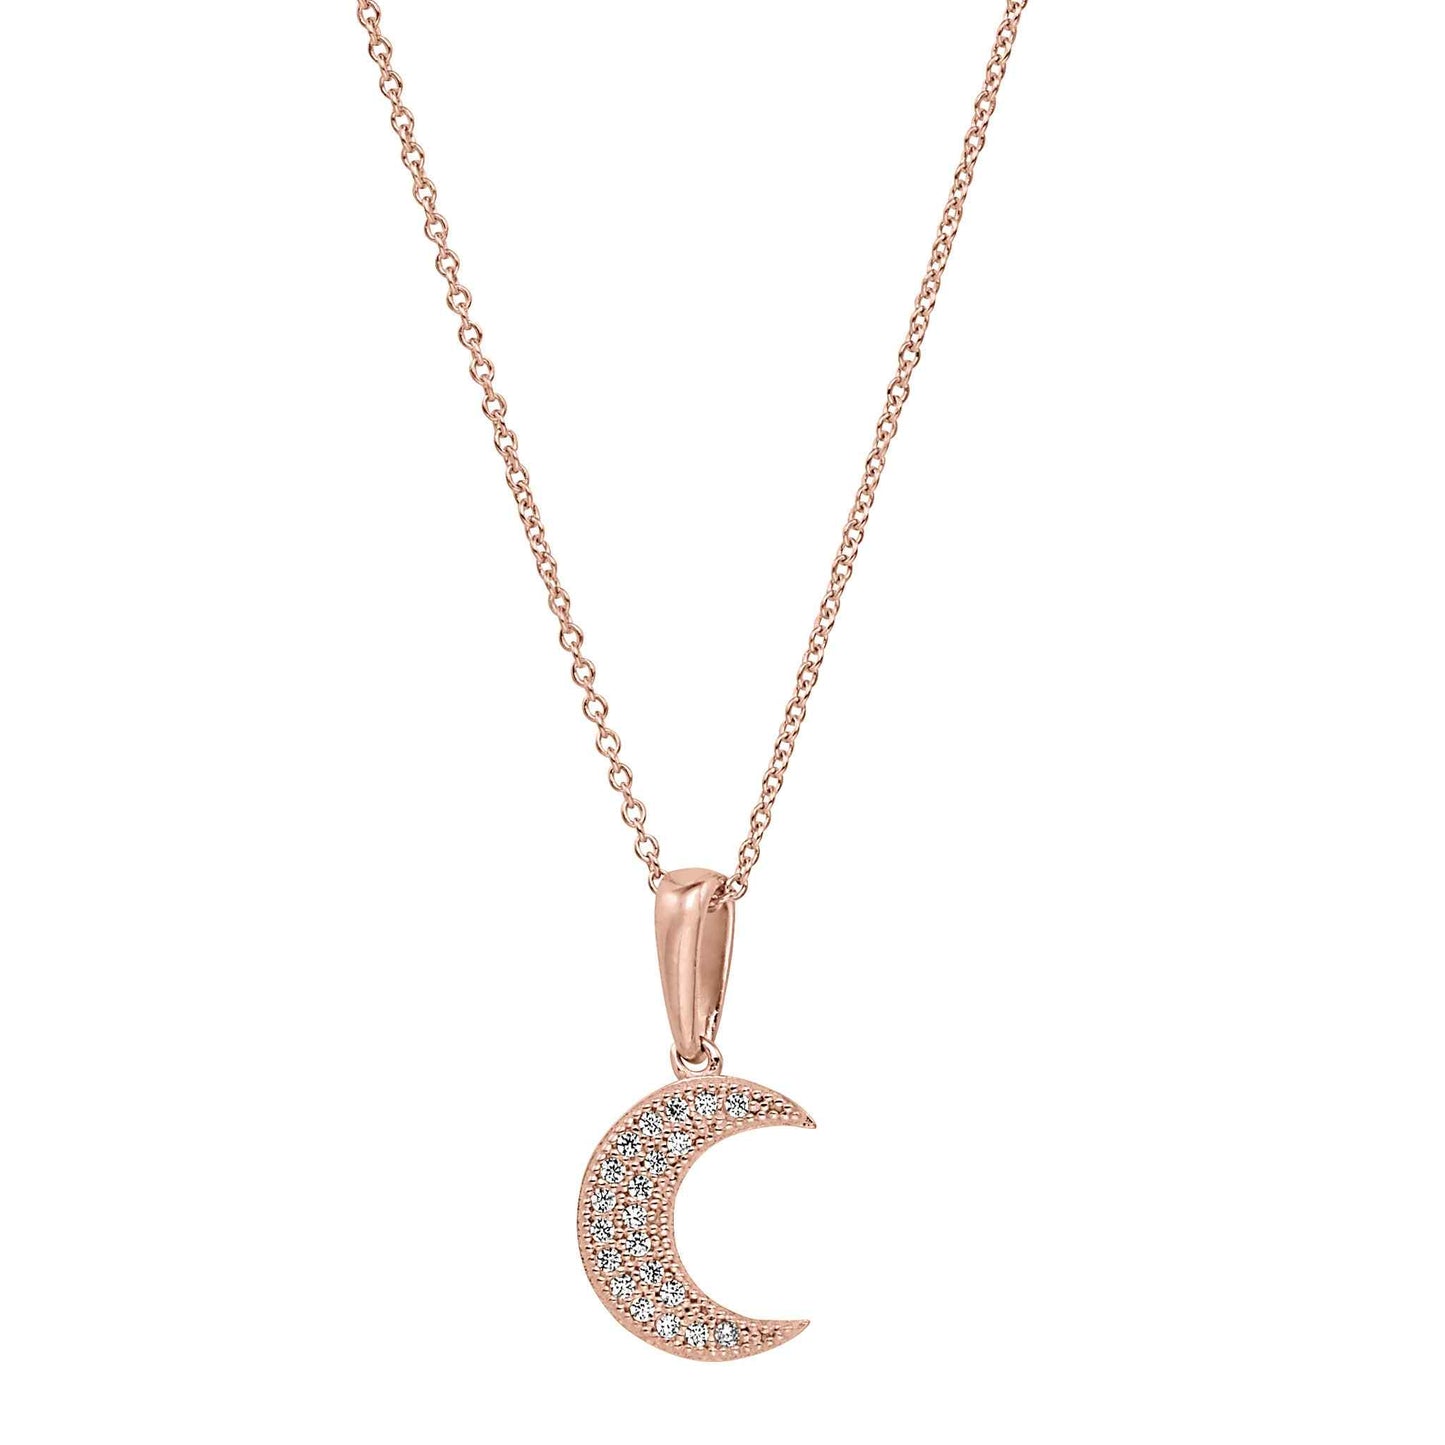 A sterling silver moon necklace with simulated diamonds displayed on a neutral white background.